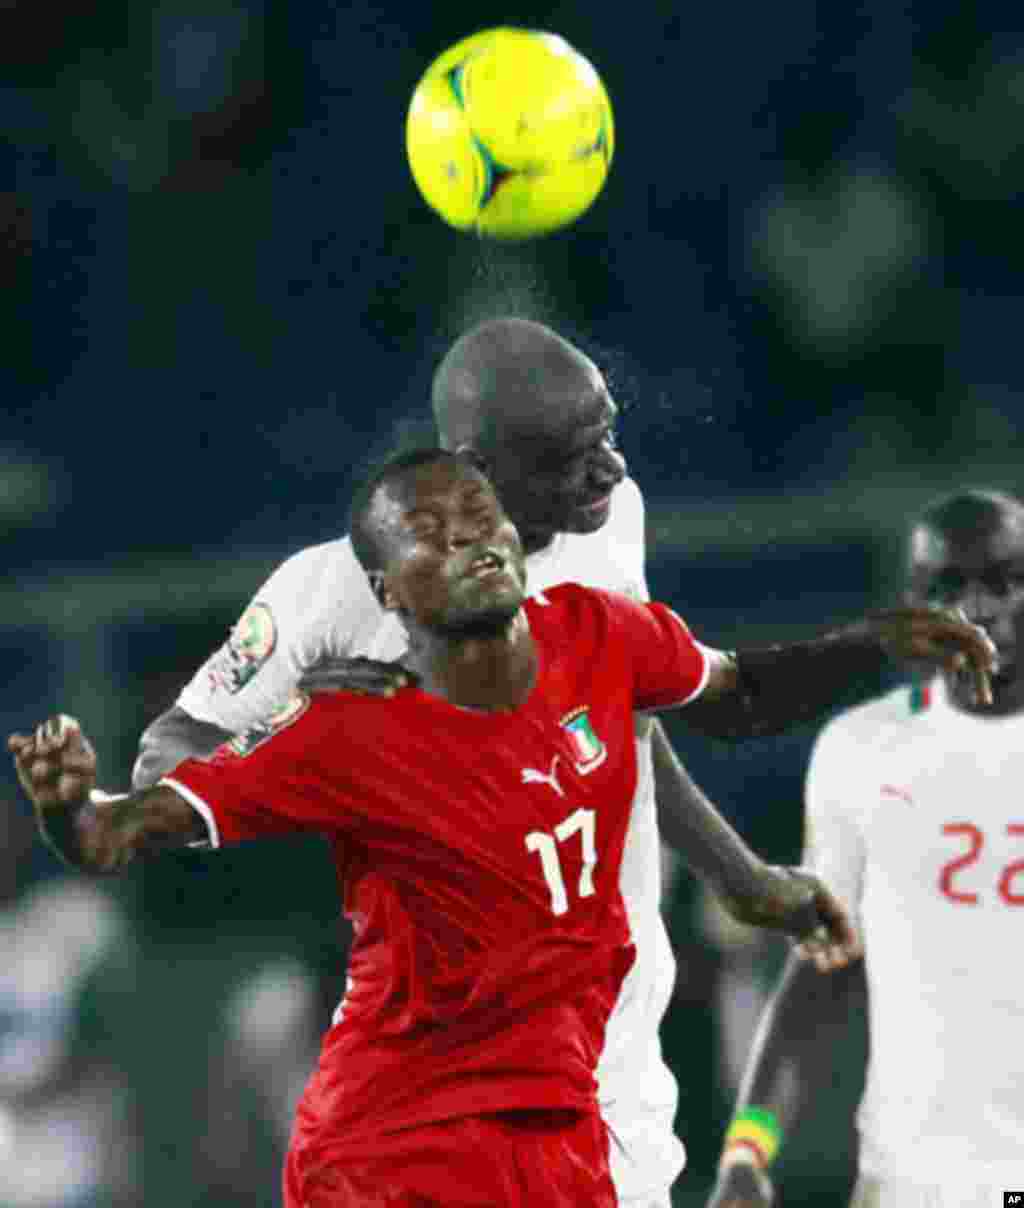 Ekanga of Equatorial Guinea challenges N'Daw of Senegal during their African Nations Cup Group A soccer match at Estadio de Bata